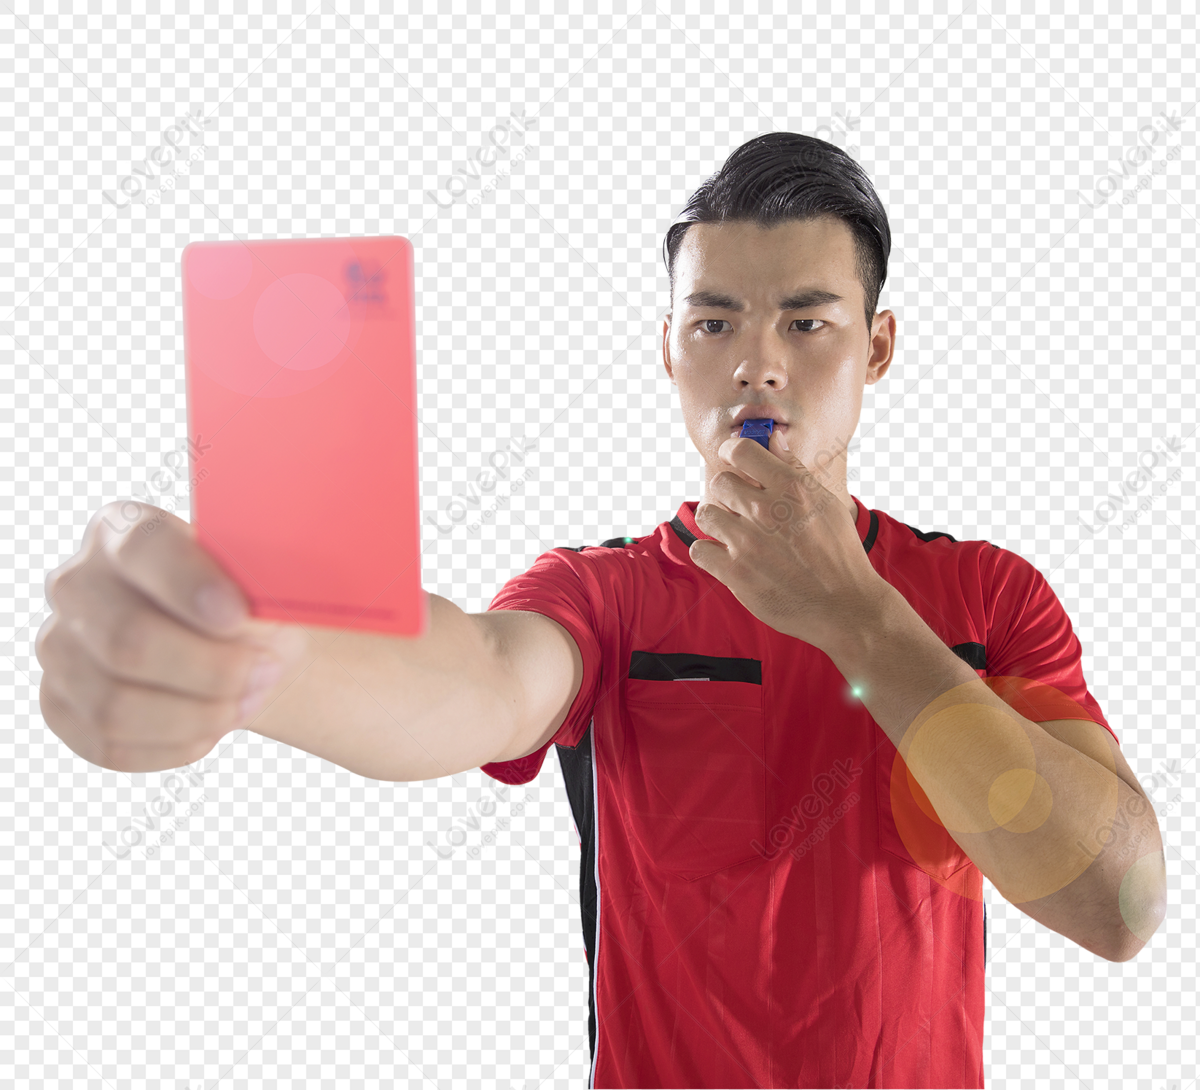 football referee clipart png